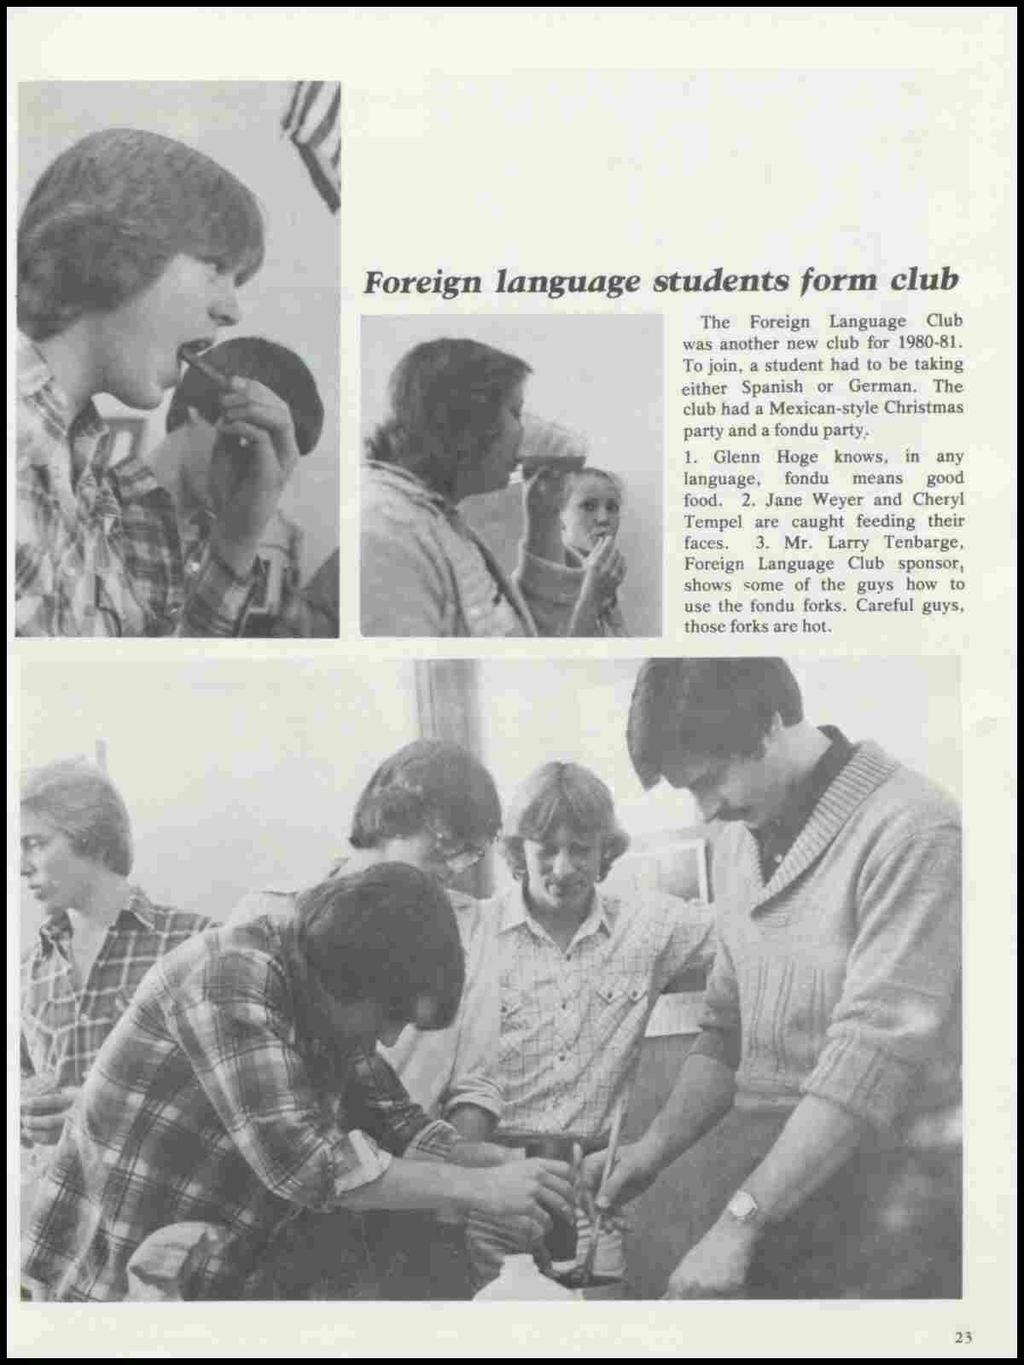 Foreign language students form club The Foreign Language Oub was another new club for 1980-81. To join, a student had to be taking either Spanish or German.